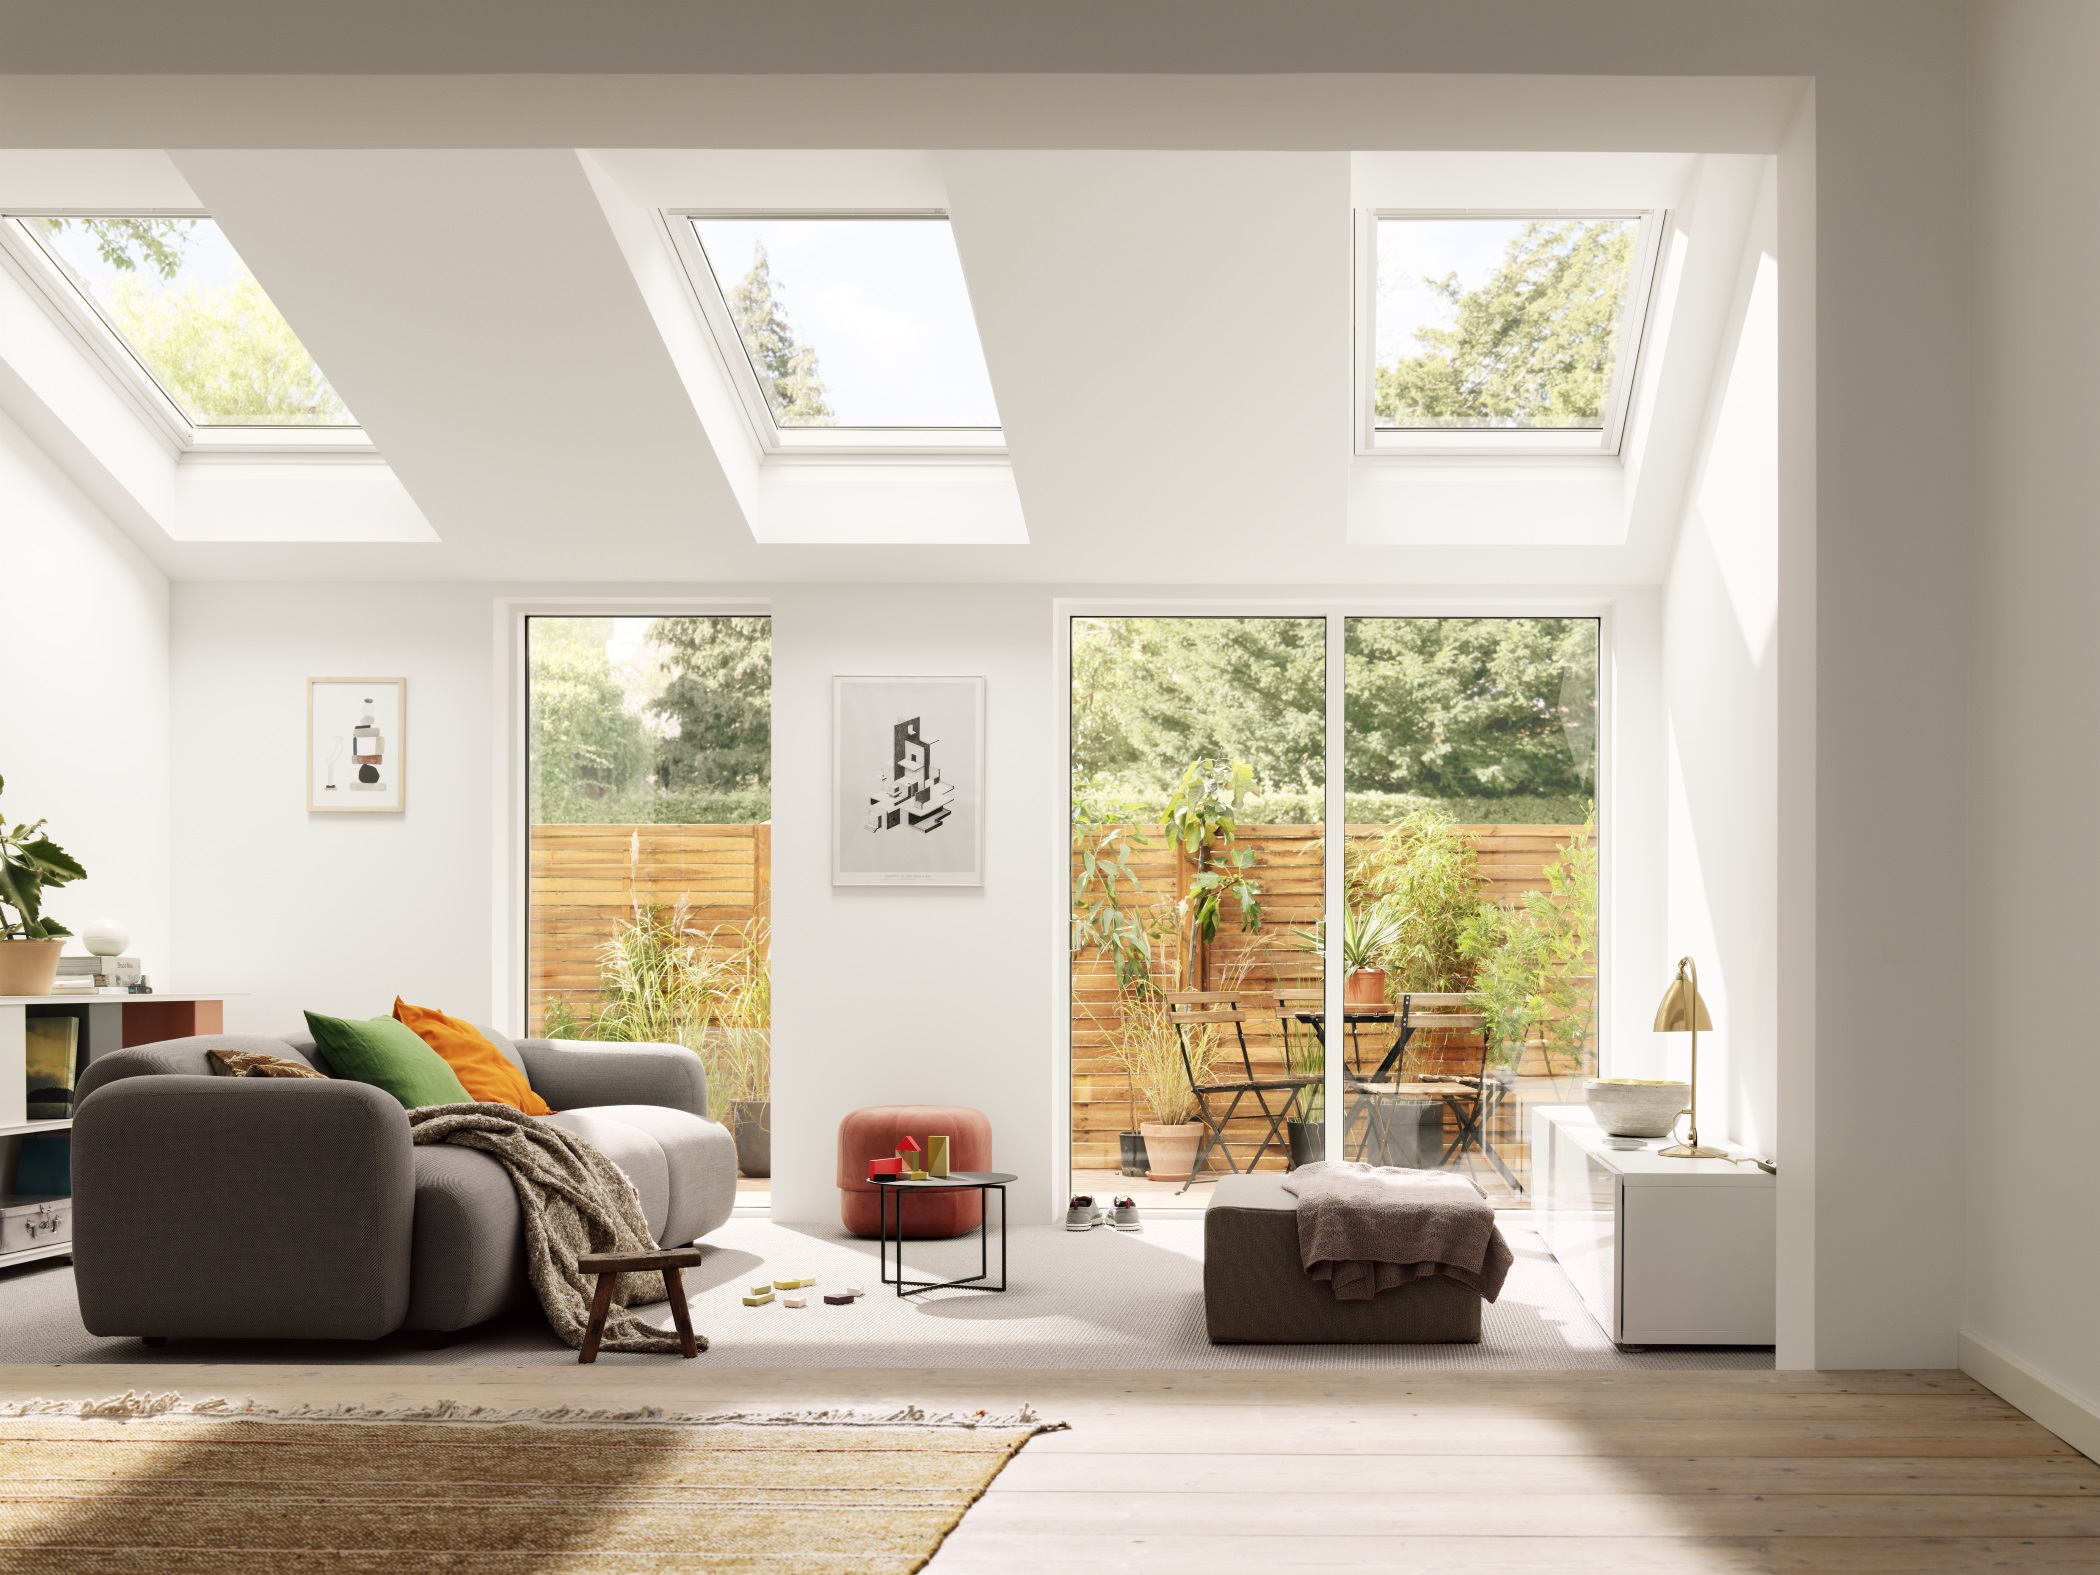 Roof windows and beautiful natural light